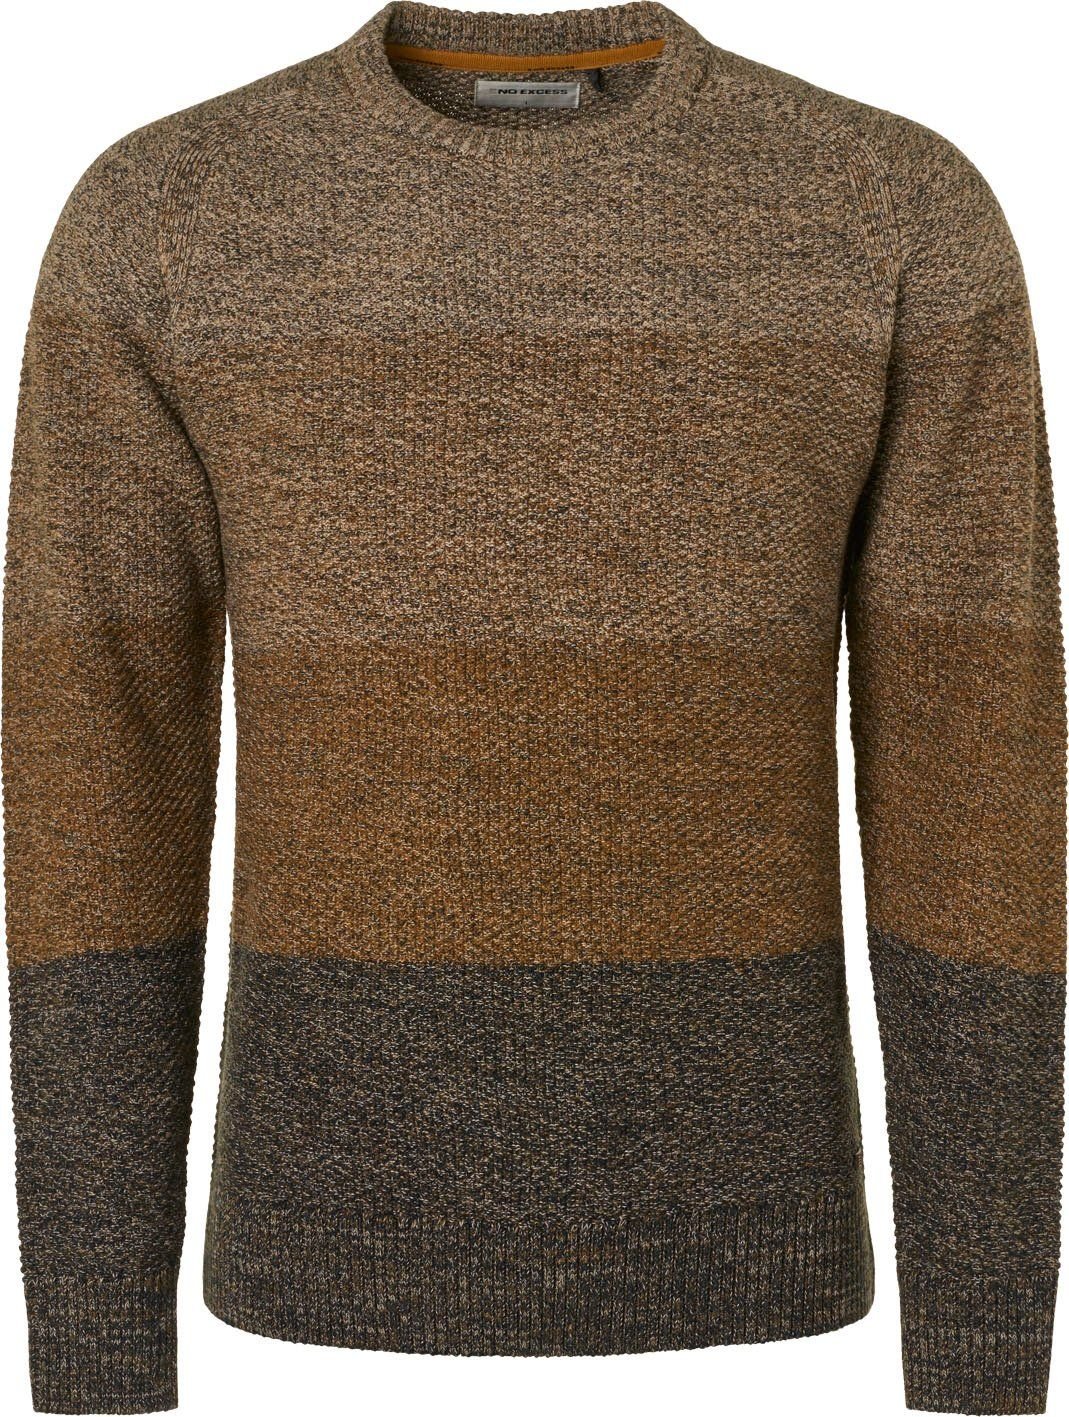 No-Excess Knitted Pullover Brown size 3XL